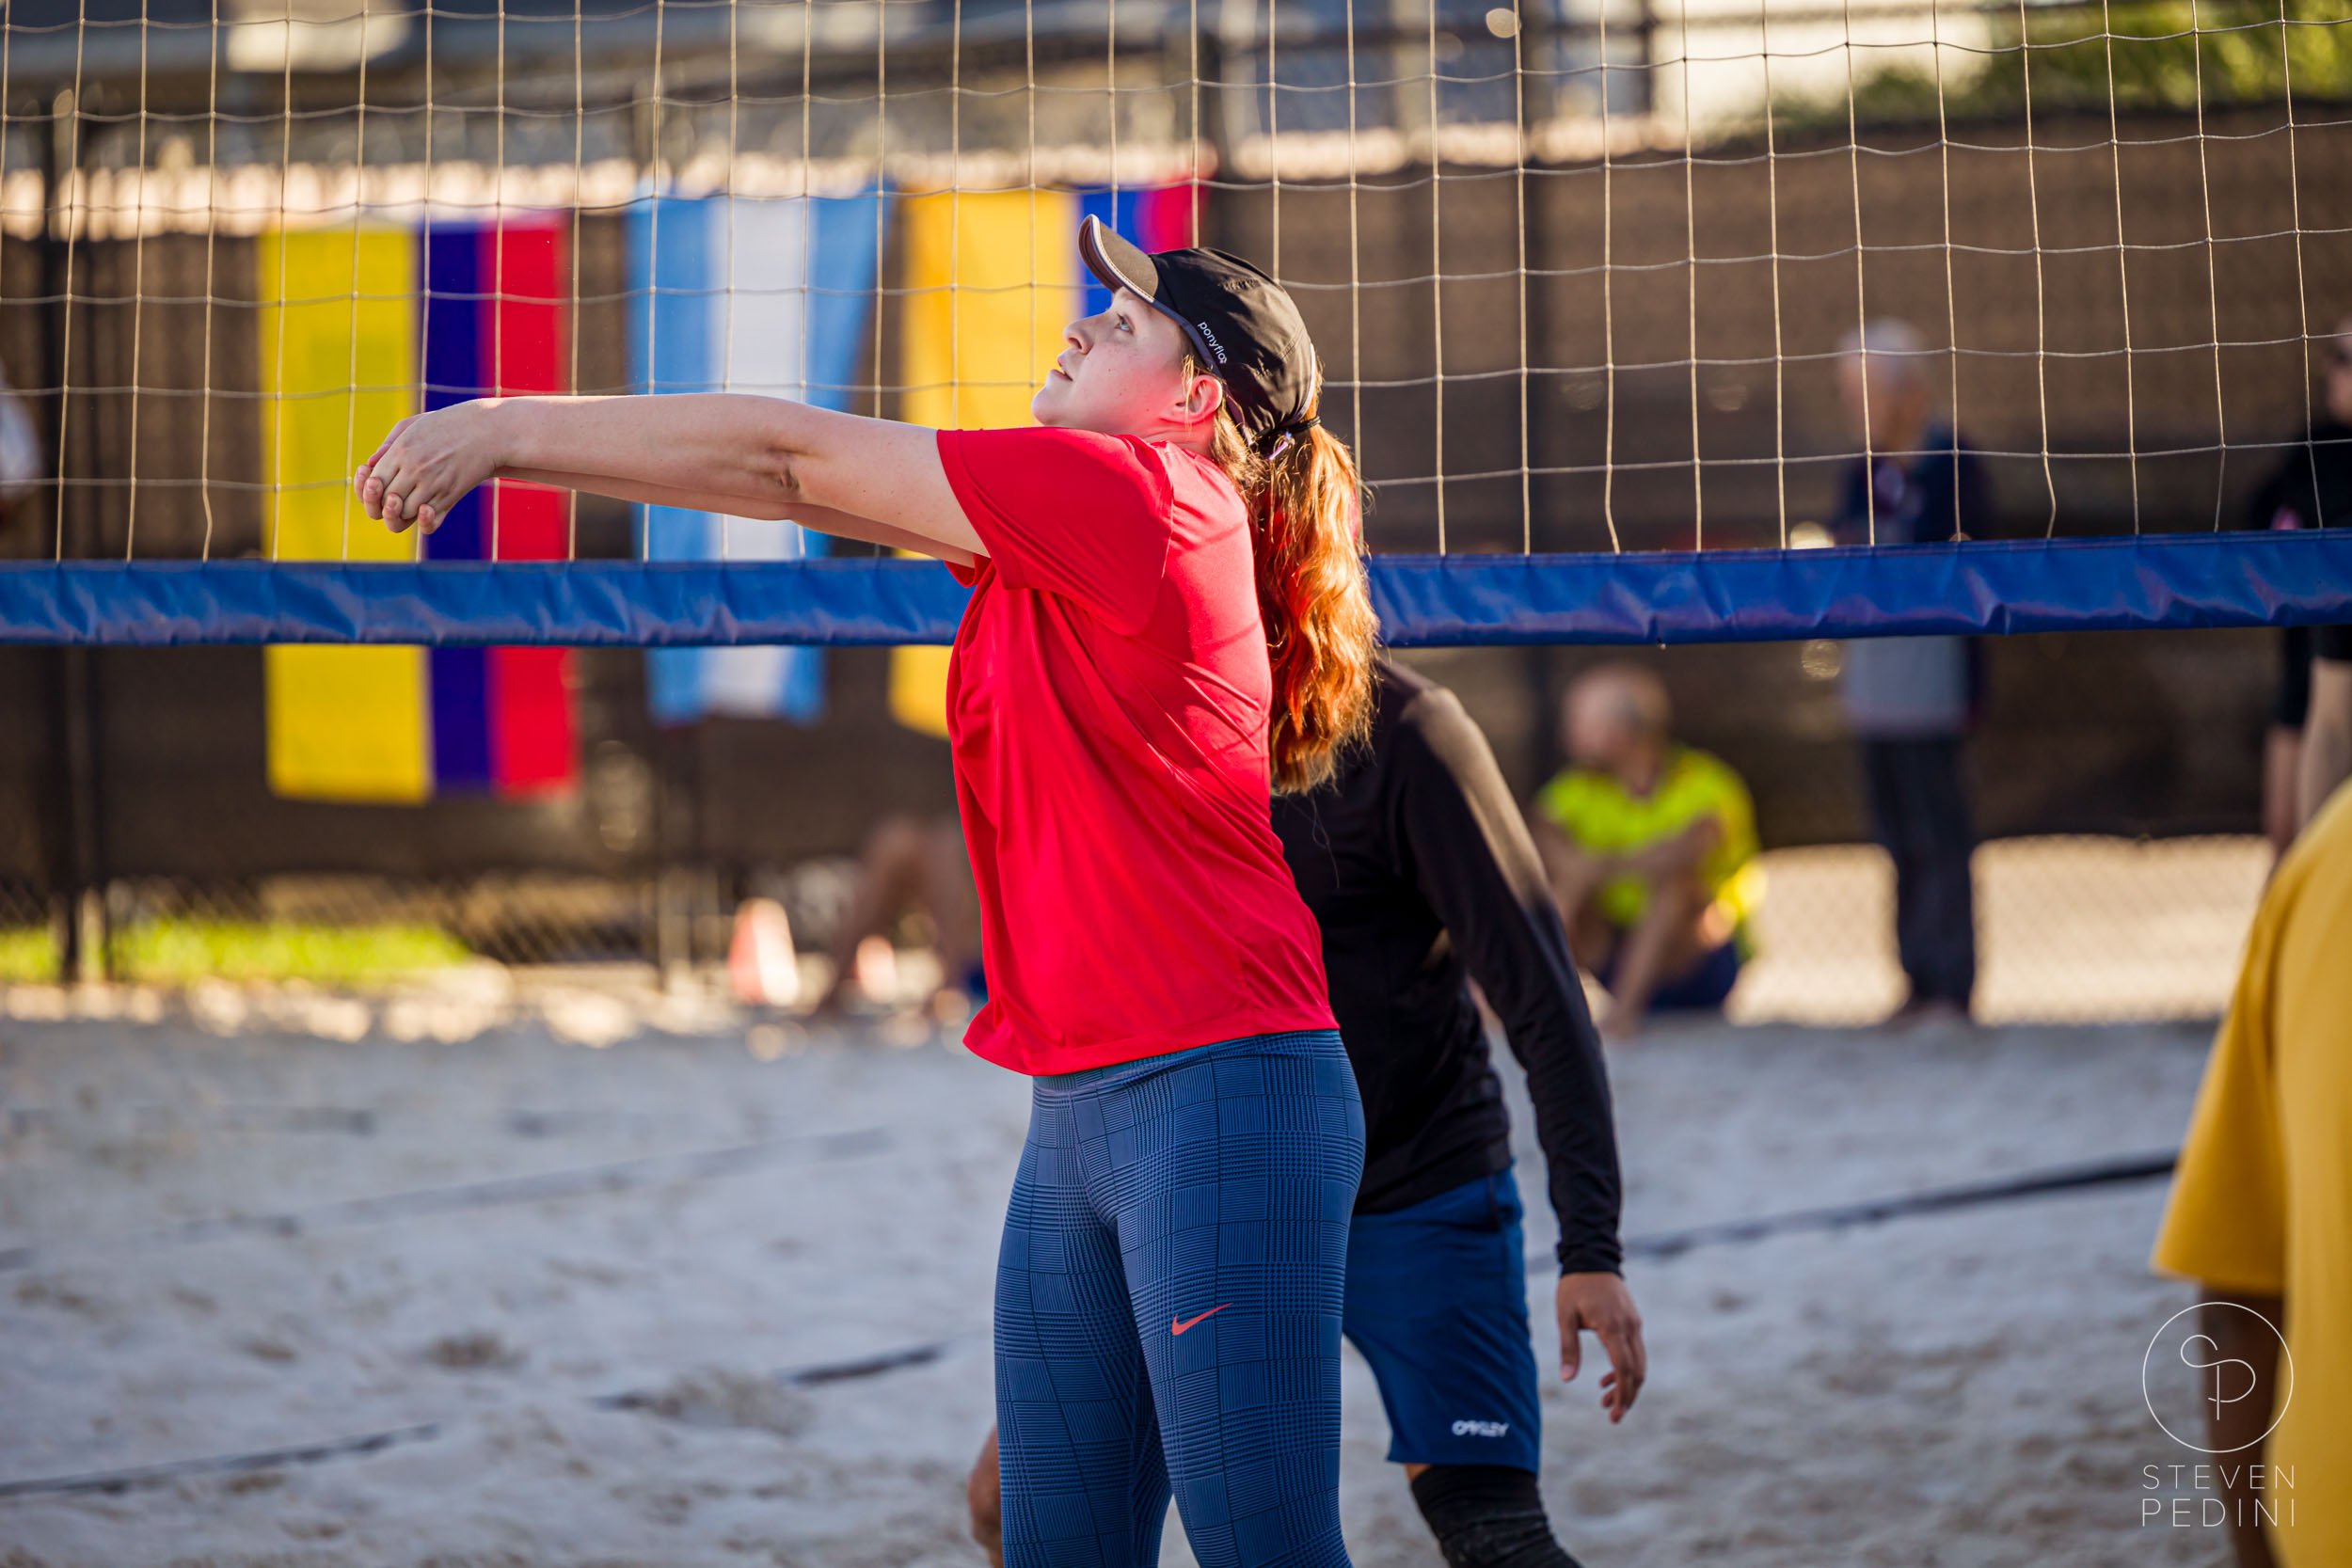 Steven Pedini Photography - Bumpy Pickle - Sand Volleyball - Houston TX - World Cup of Volleyball - 00114.jpg